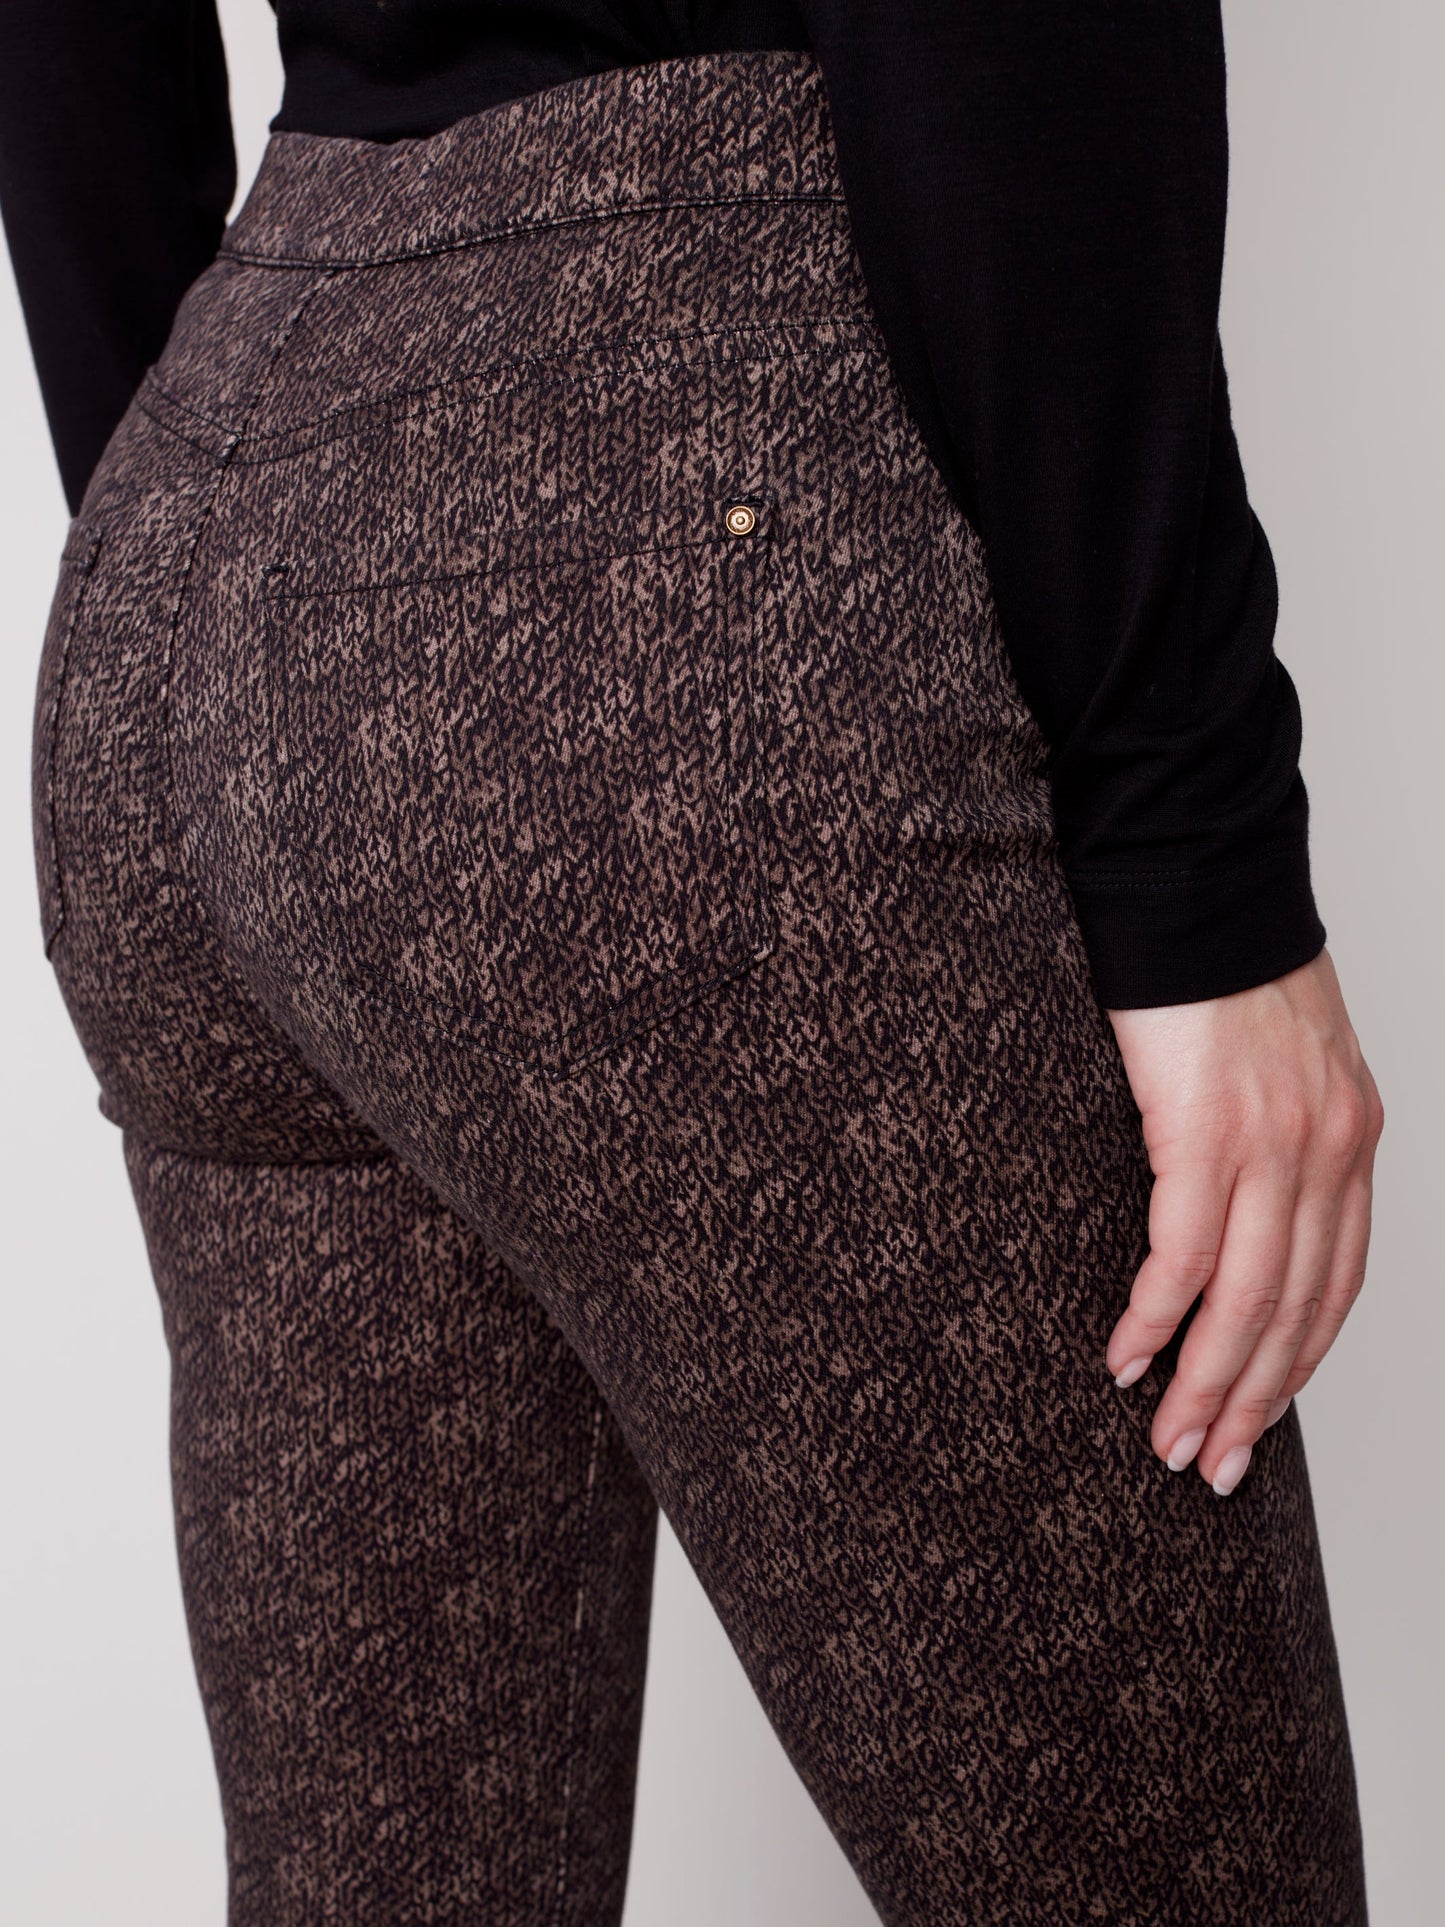 The model is wearing a black turtleneck and brown Charlie B Printed Twill Pull On Pant.